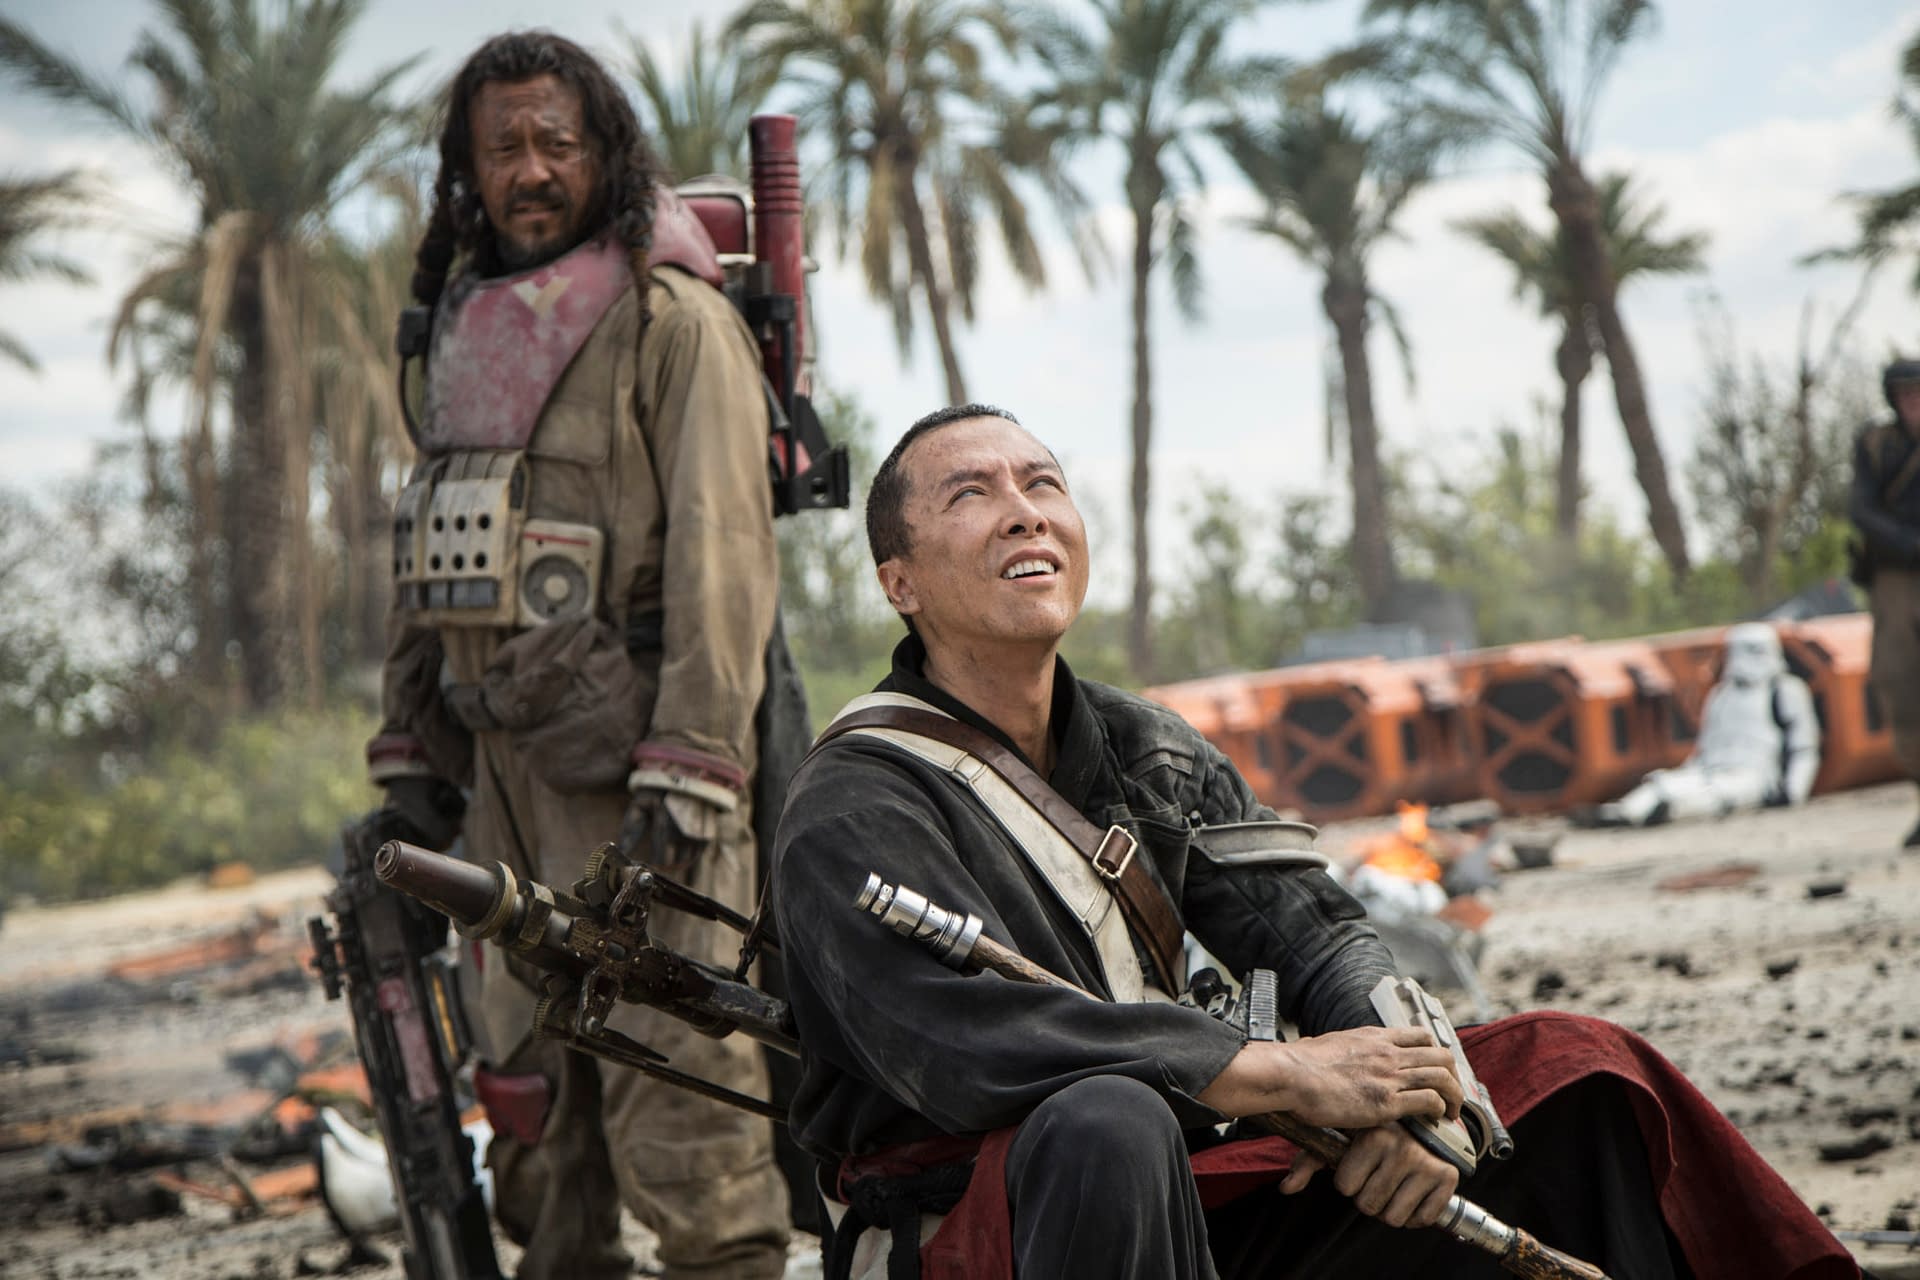 Donnie Yen Explains Why 'Star Wars' Doesn't Work in China